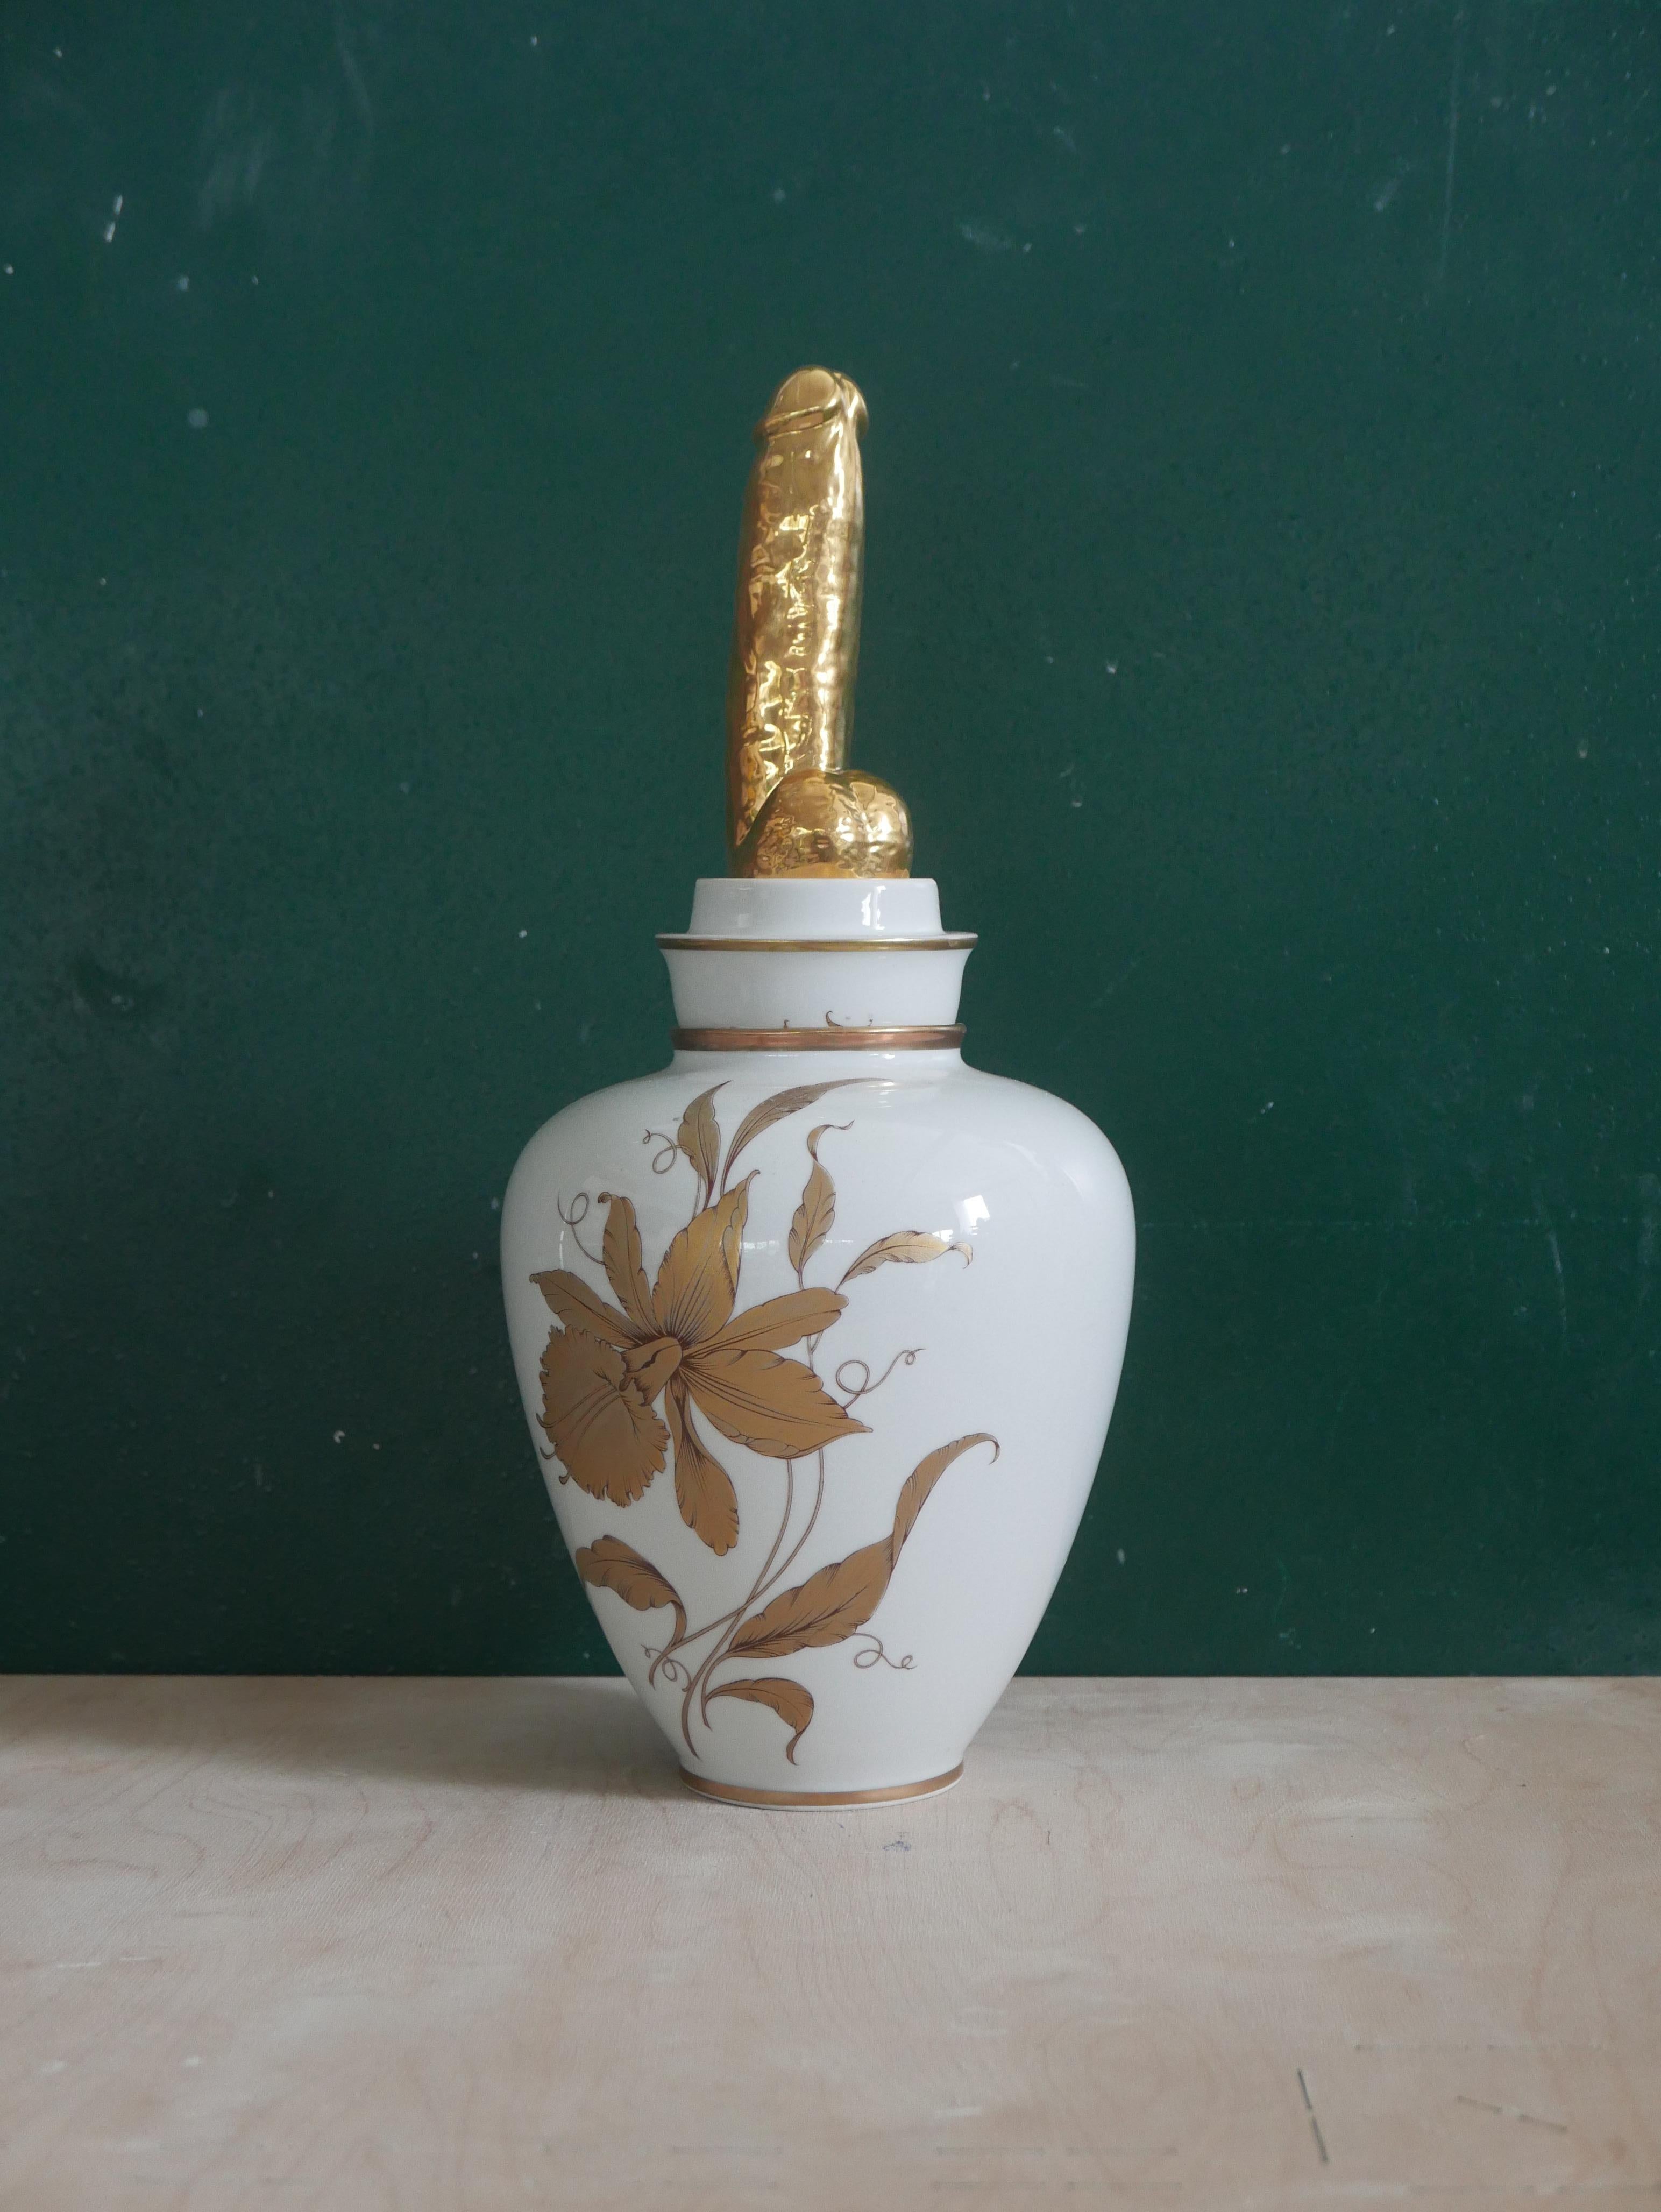 Italian Porcelain Ceramic and 18k Gold Sculptural Vase Italy Contemporary, 21st Century For Sale